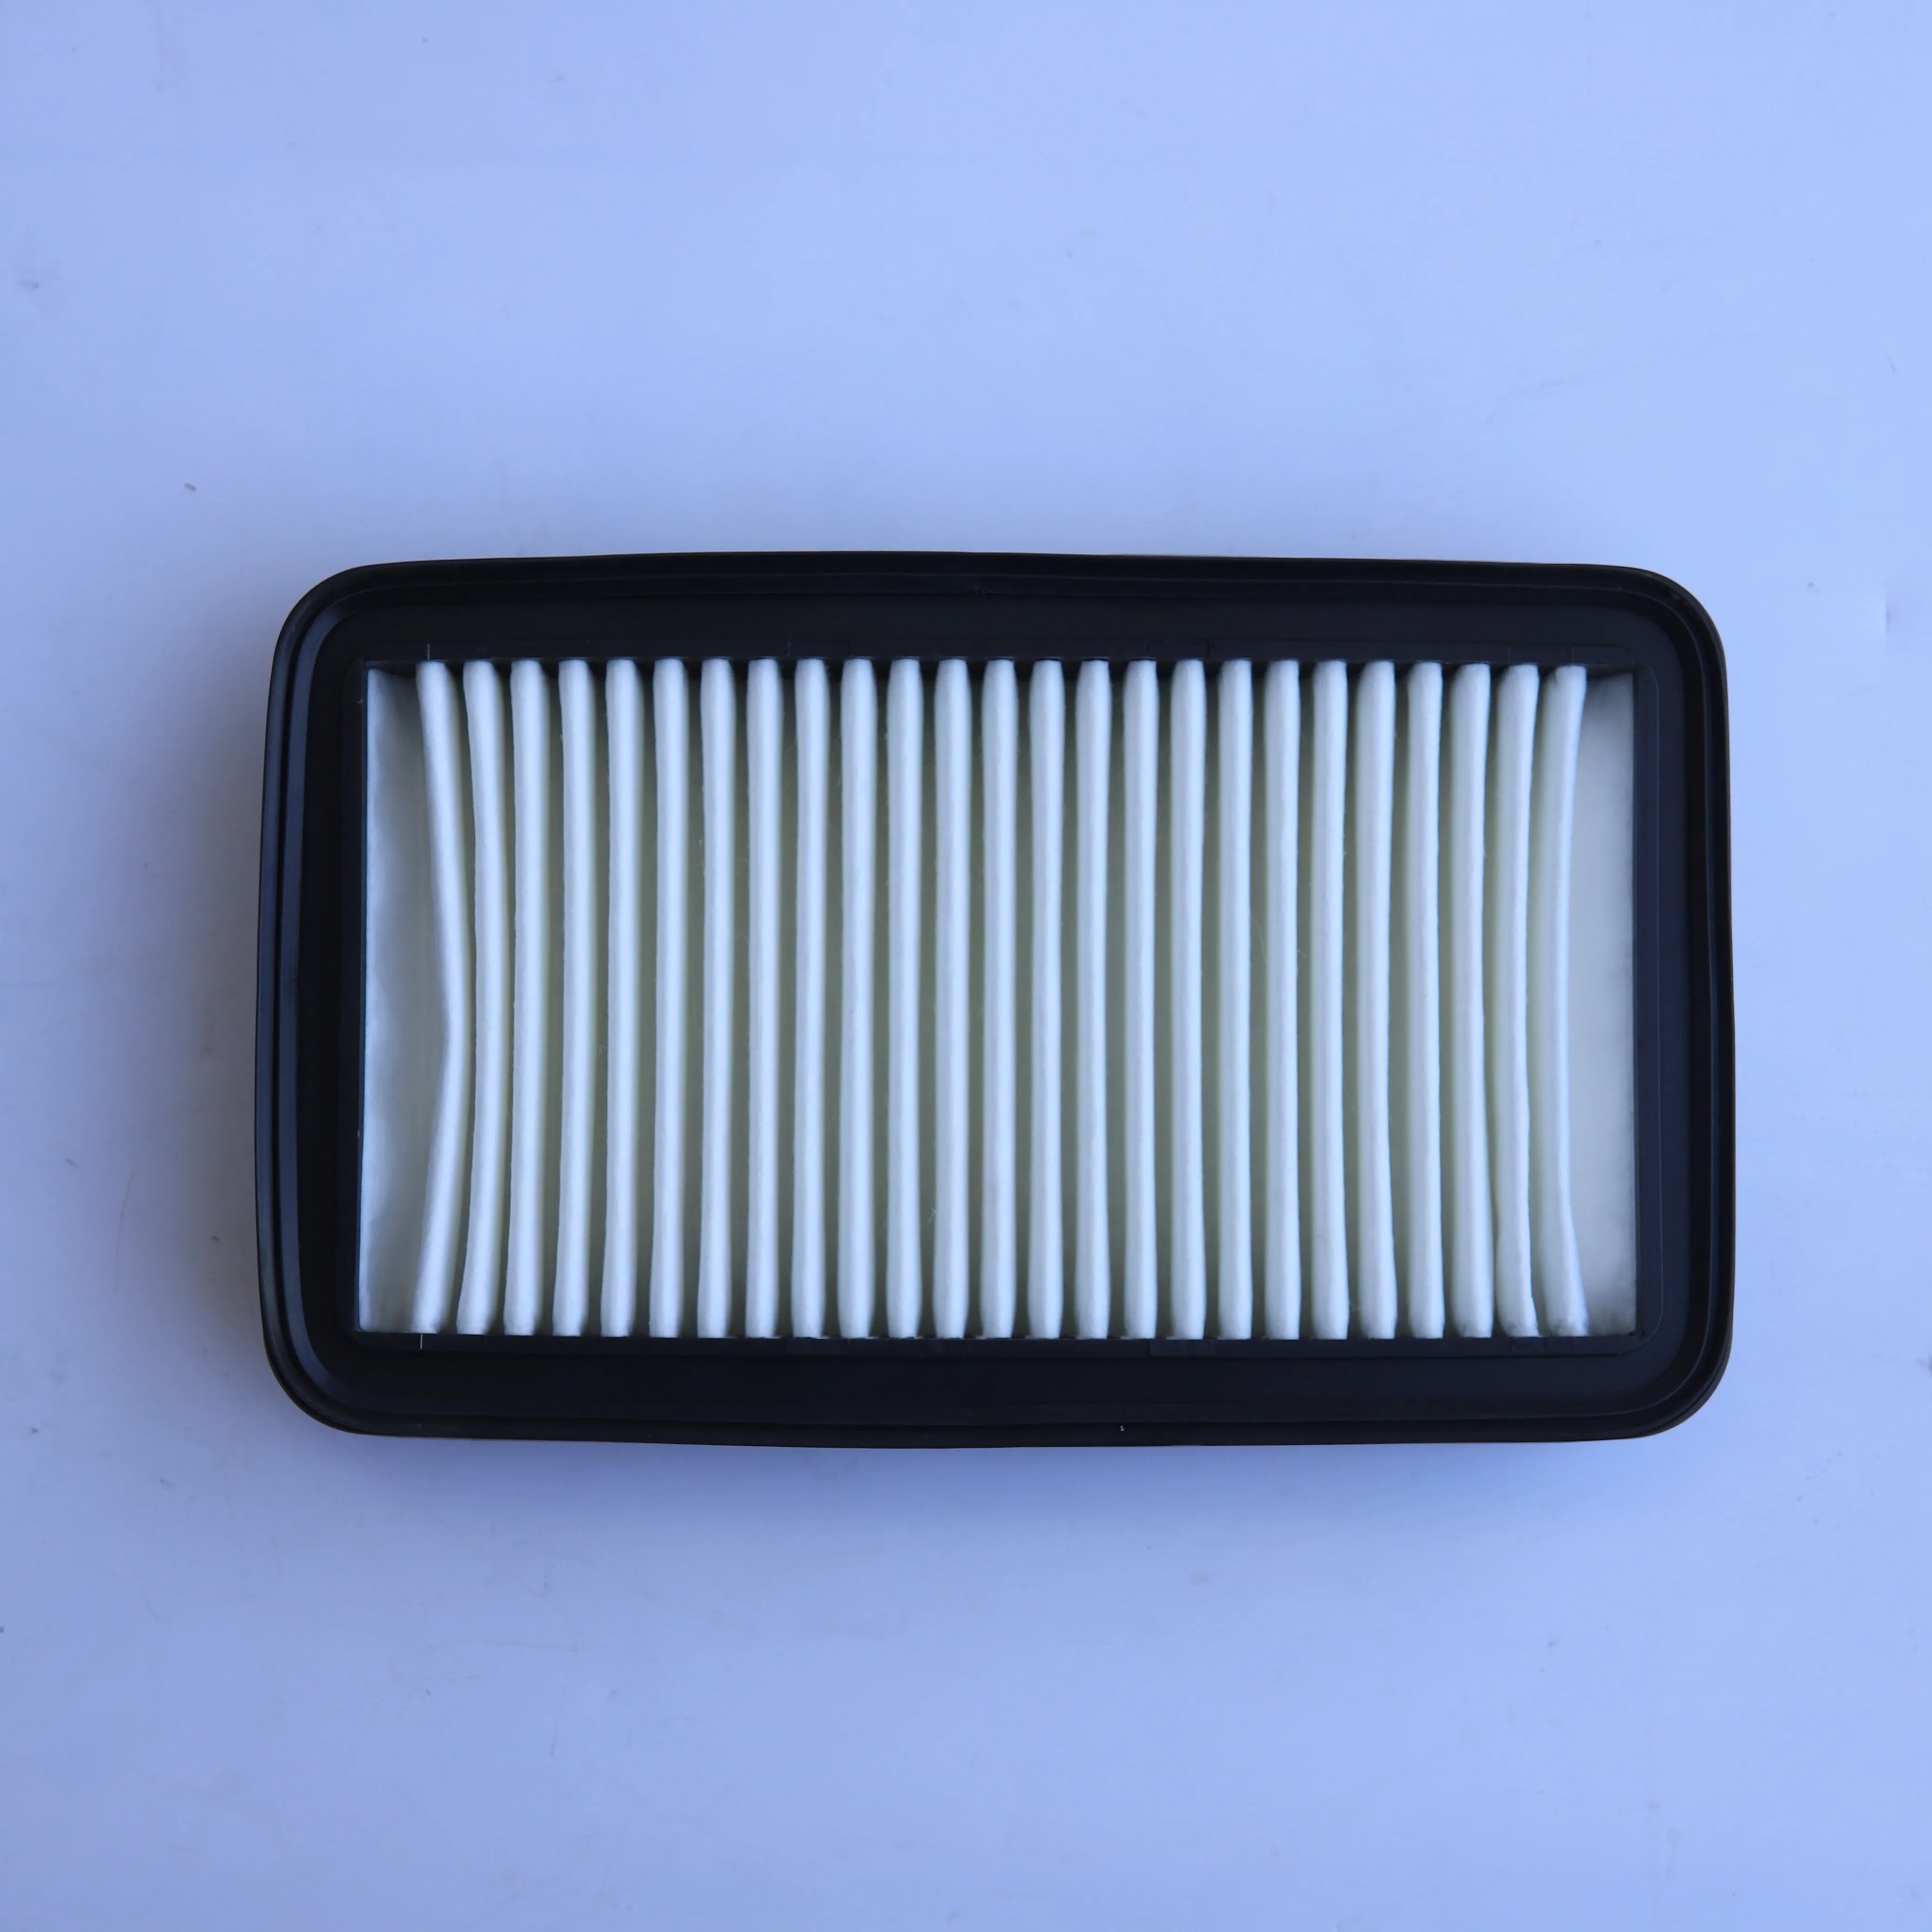 Performance Engines Accessories Auto Cabin Car Air Filter For SUZUKI SWIFT Japanese car OEM 13780-63J00